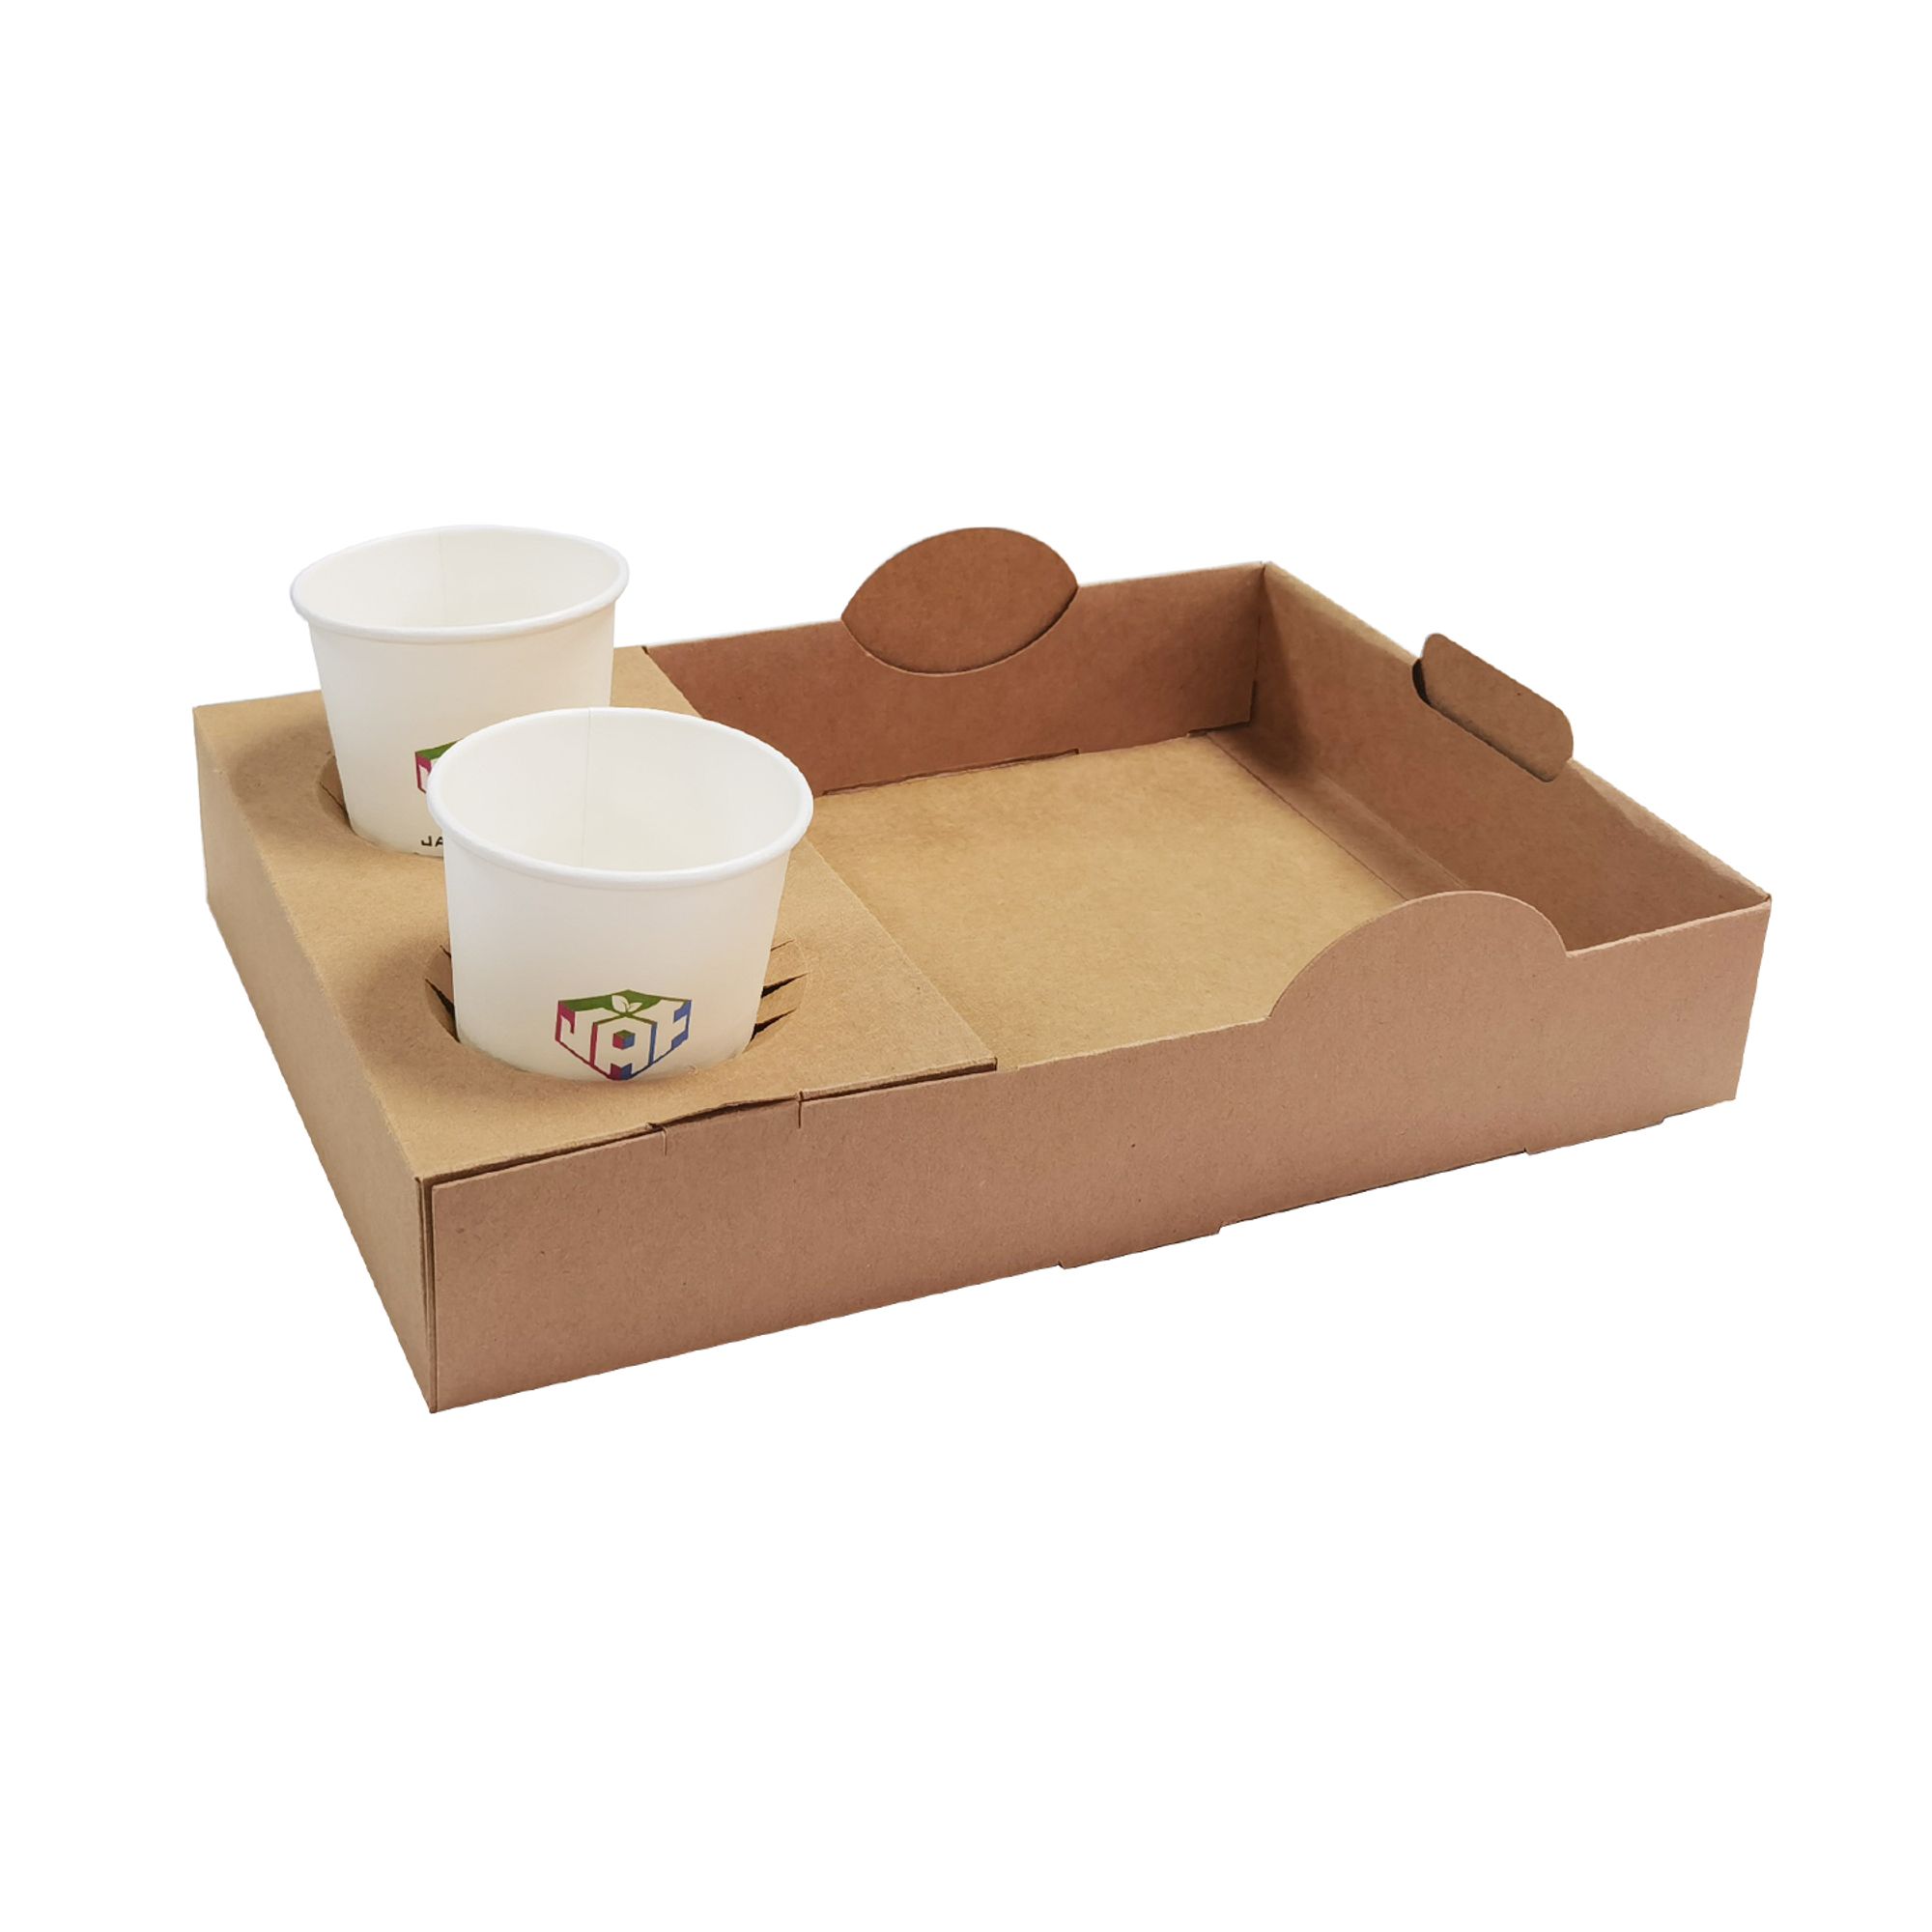 RTO-26 Pop up Box with drink holder at side